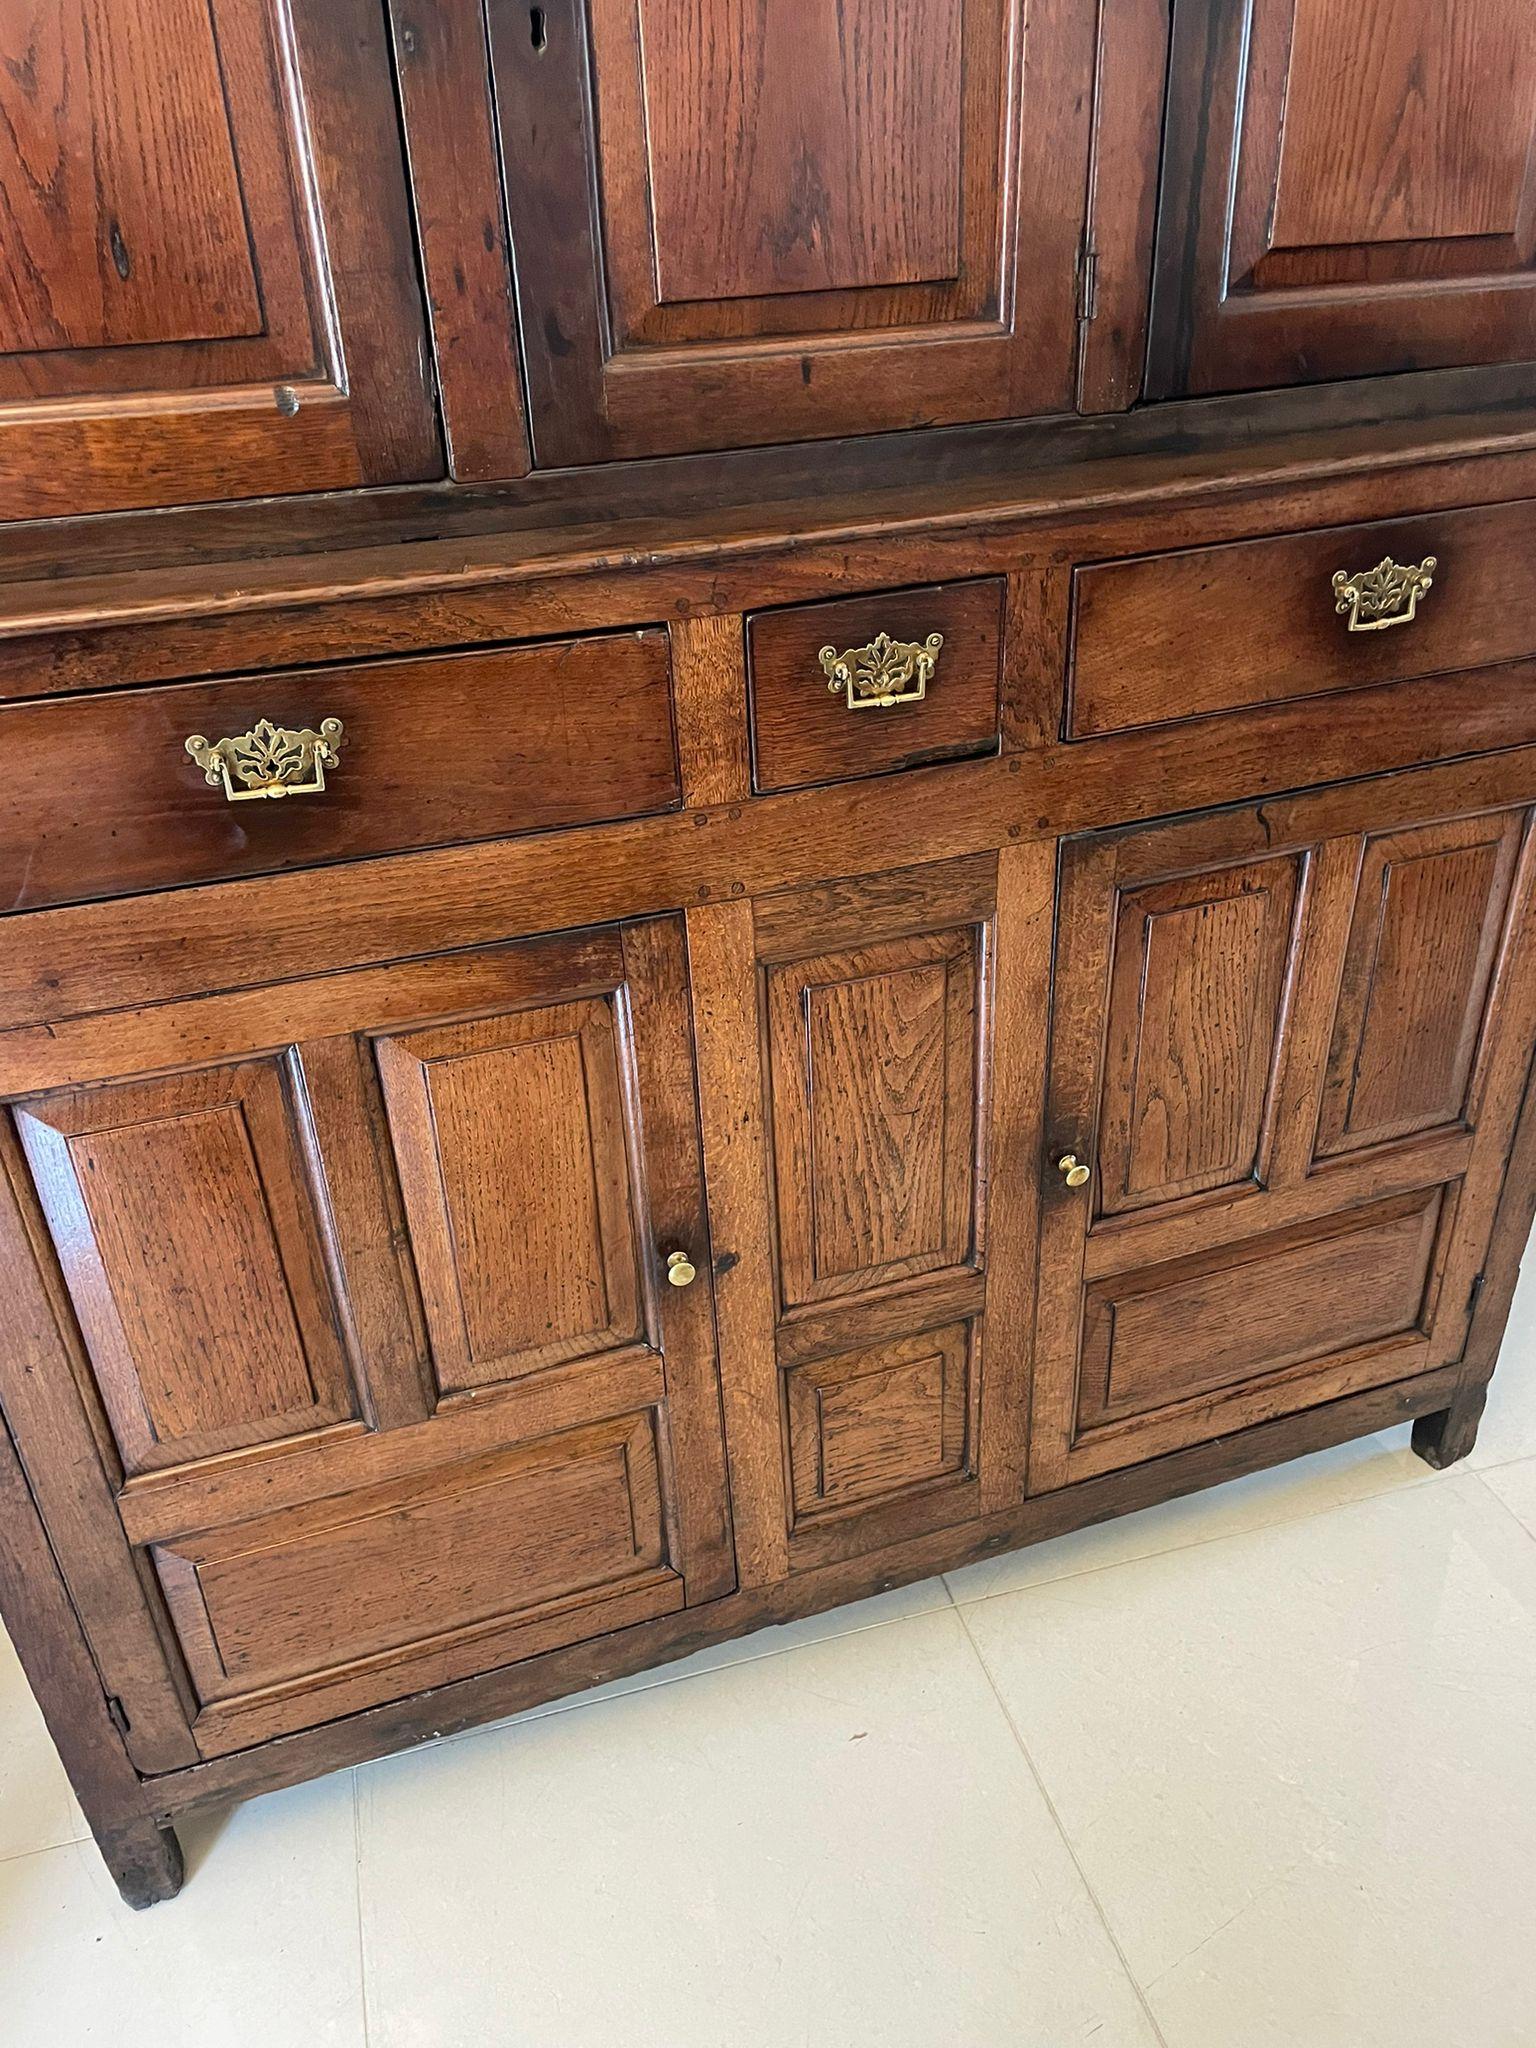 Large antique 17th century Welsh quality oak Deuddarn cupboard having a moulded cornice with turned finials, three shaped moulded edge panel doors opening to reveal a storage compartment and fitted drawers. The interior base having three drawers